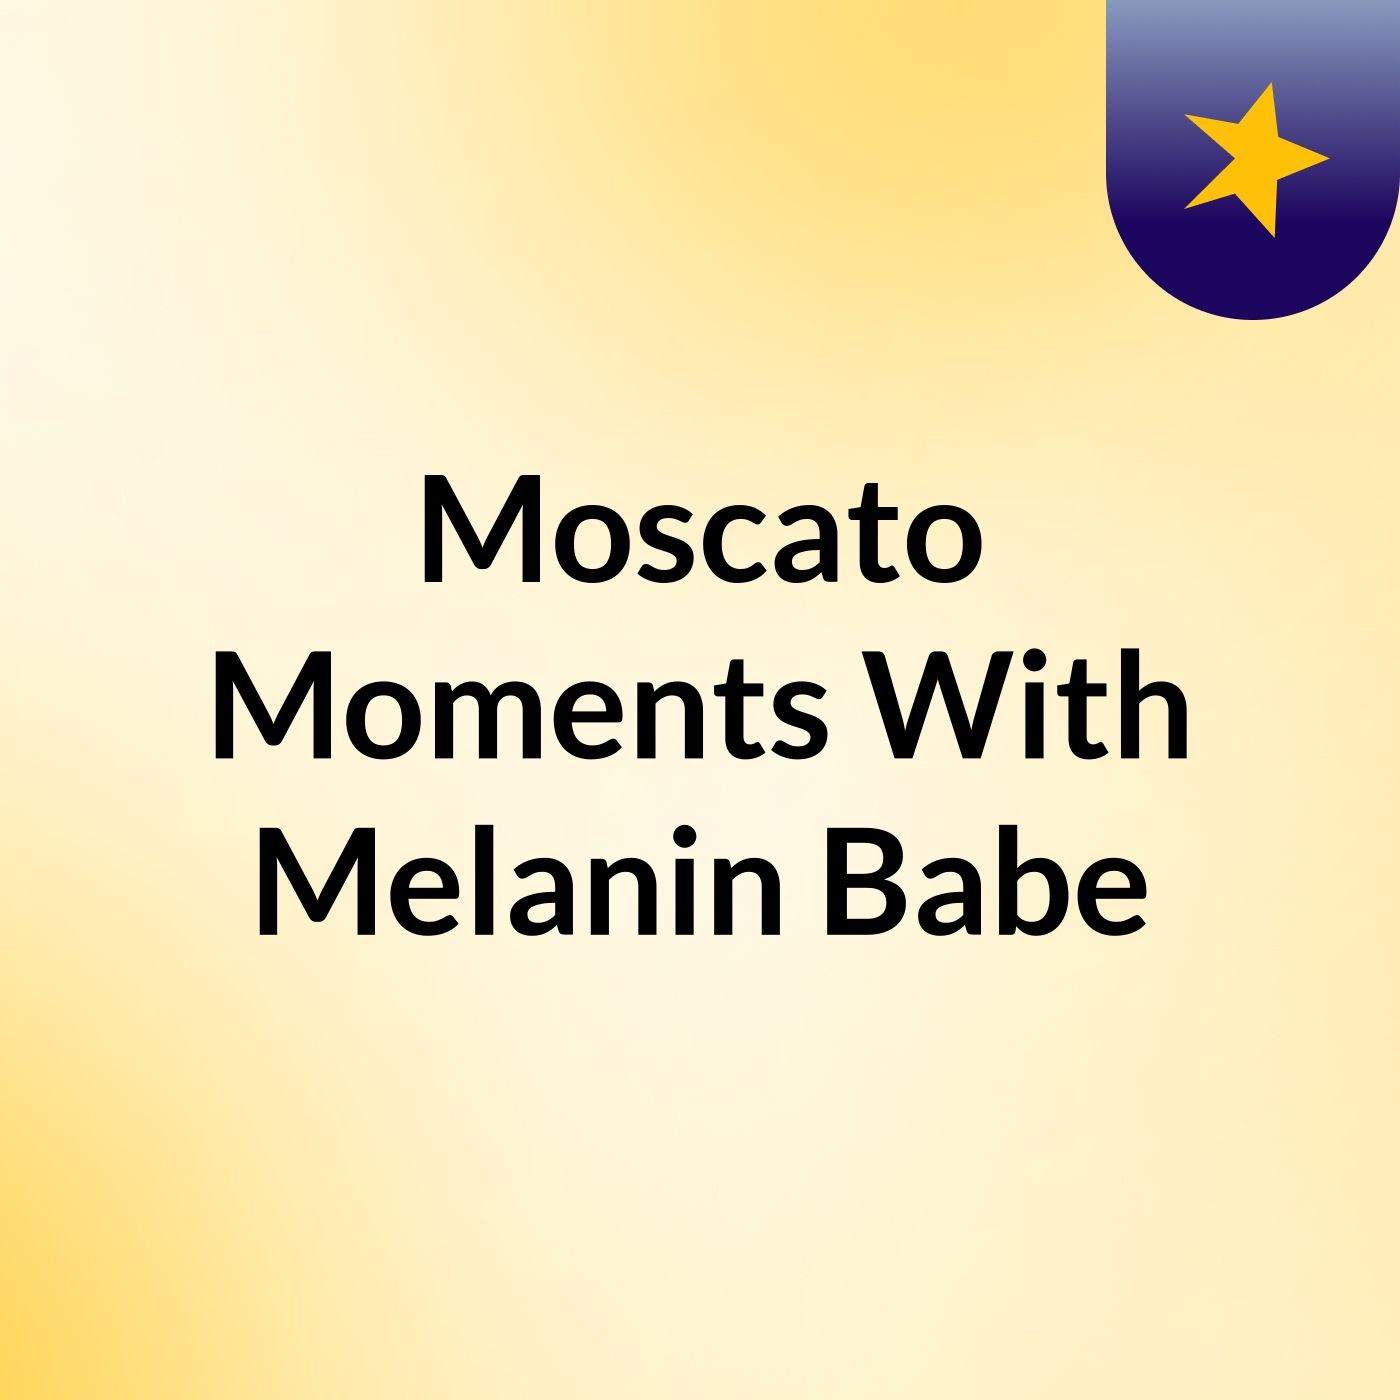 Moscato Moments With Melanin Babe